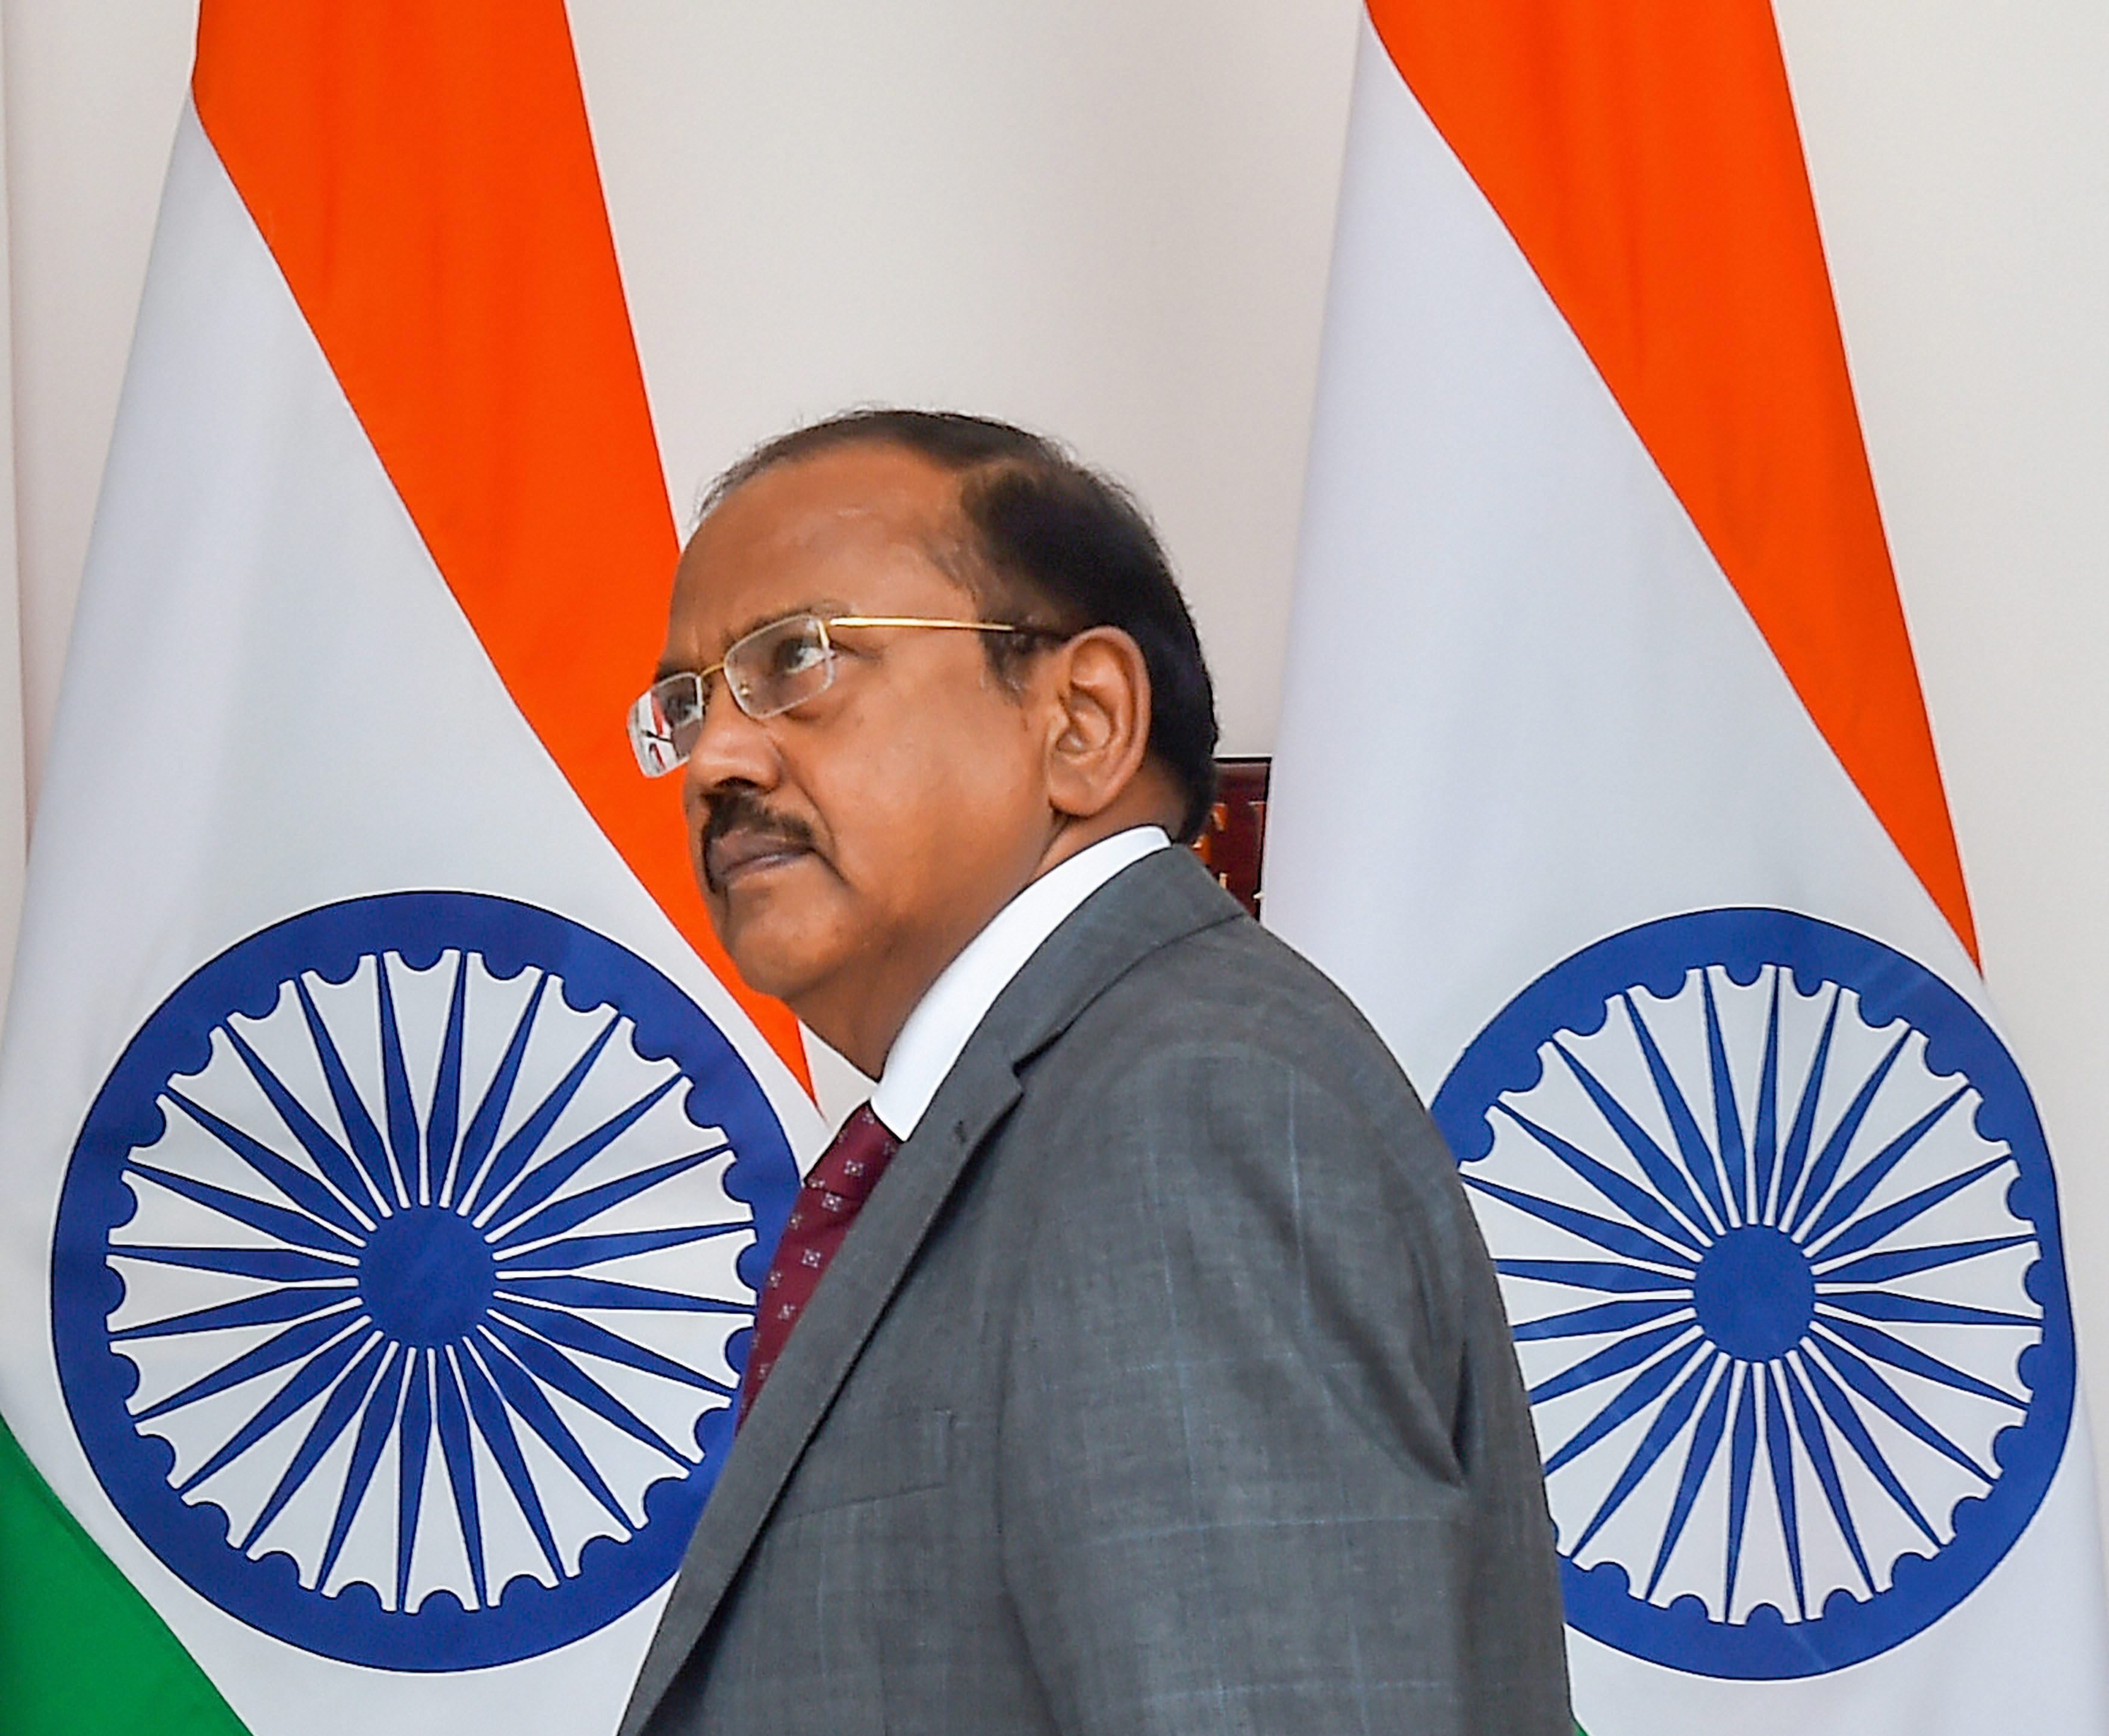 New Delhi: NSA Ajit Doval arrives to attend a delegation level meeting between India and South Korea, at Hyderabad House, in New Delhi on Tuesday, July 10, 2018. (PTI Photo /Kamal Singh) (PTI7_10_2018_000082B)